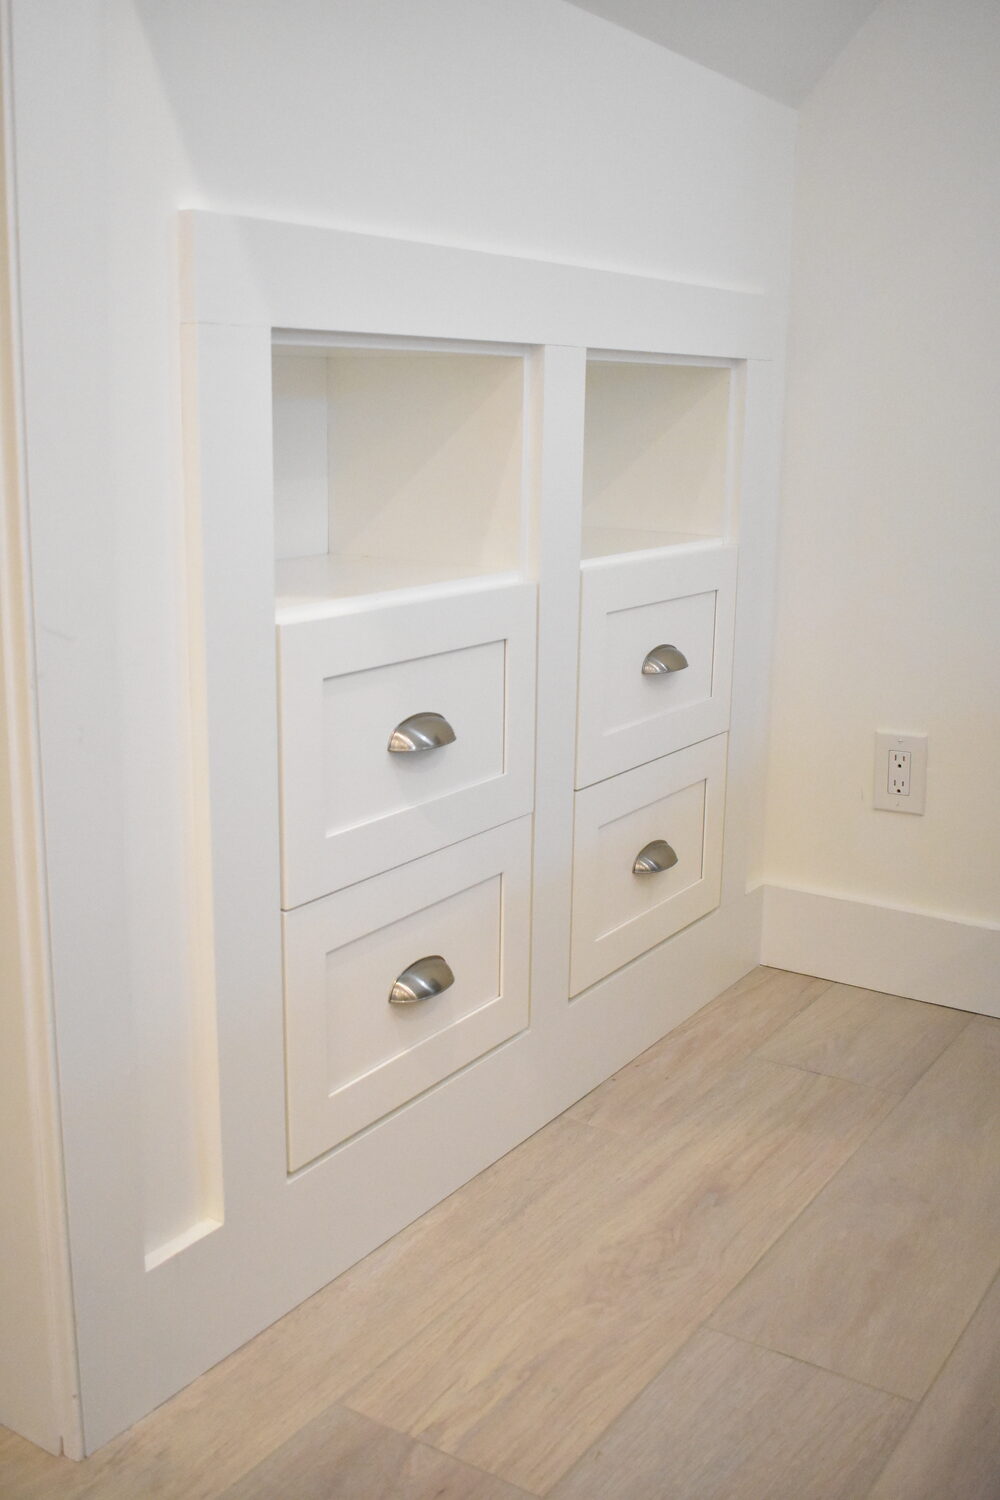 Drawers built into the master bedroom walls. BRENDAN O'REILLY